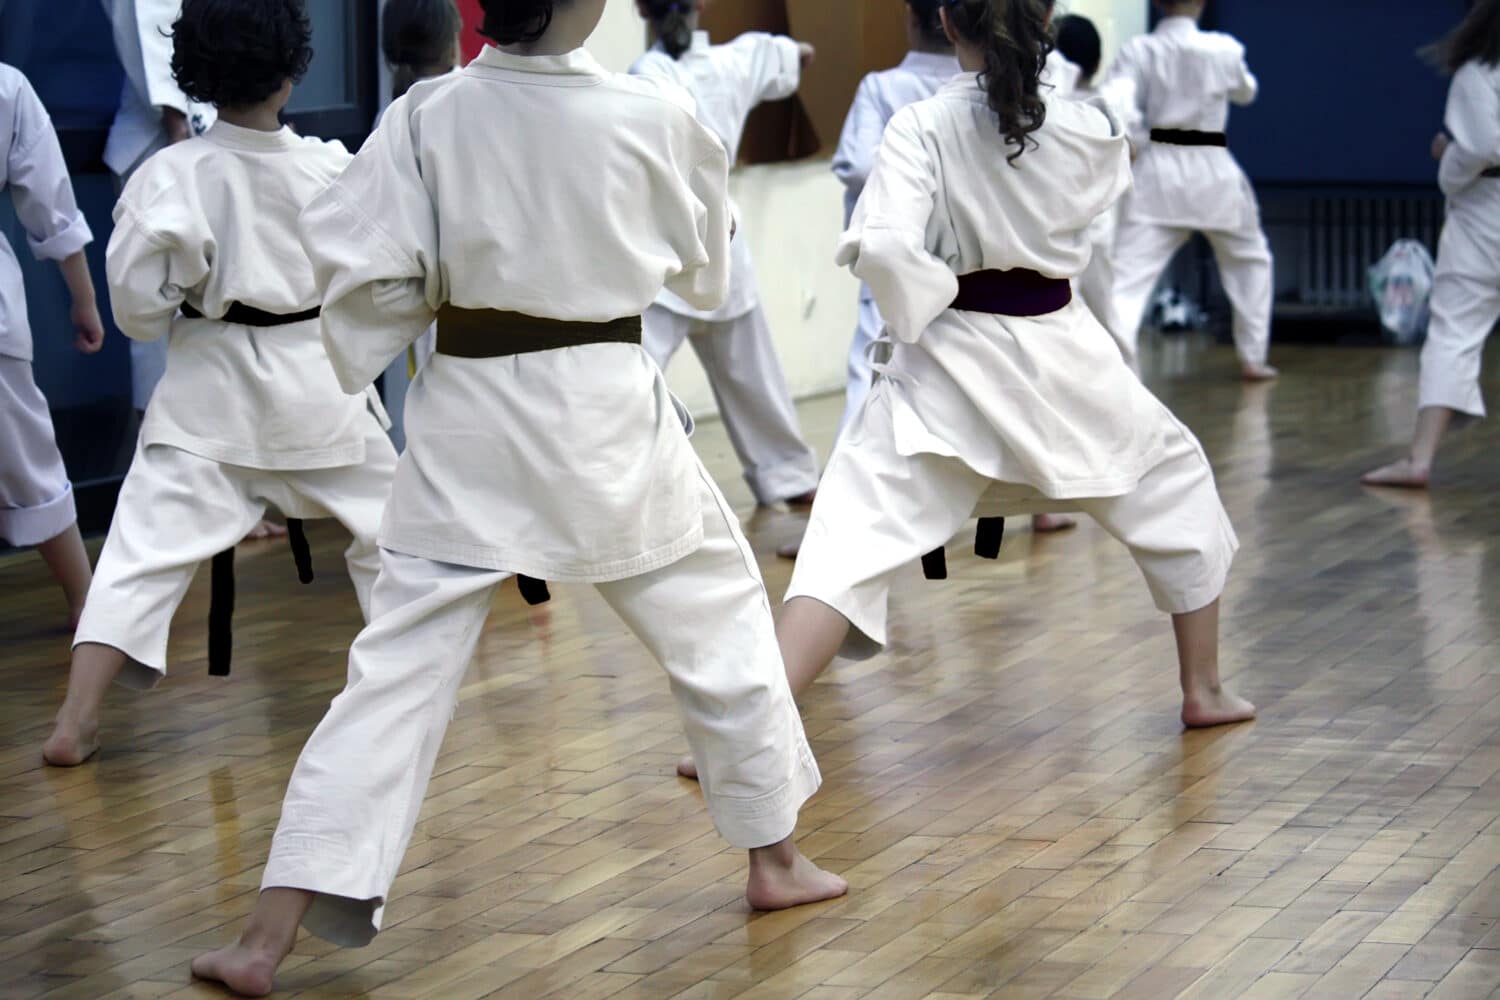 American School of Karate & Judo on Industrial Martial Arts for Kids & Adults